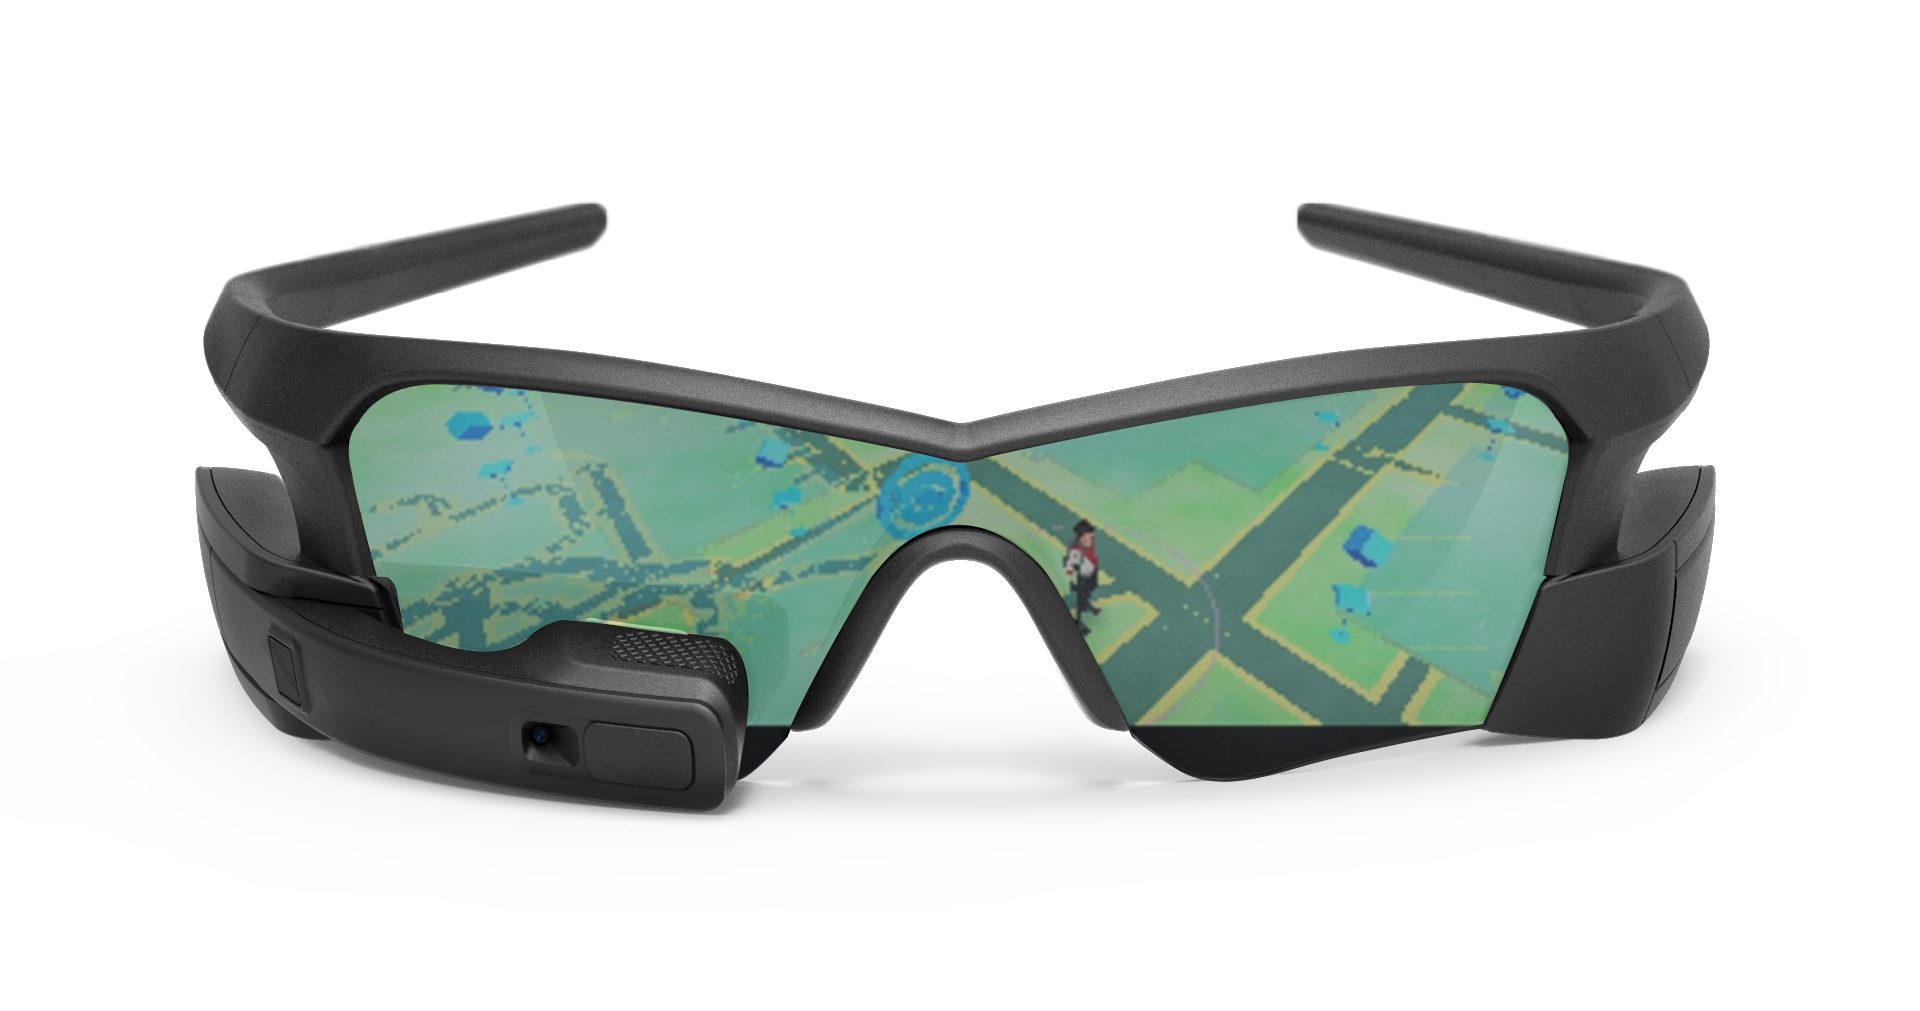 Play Pokémon GO hands-free with these smart glasses… sorta